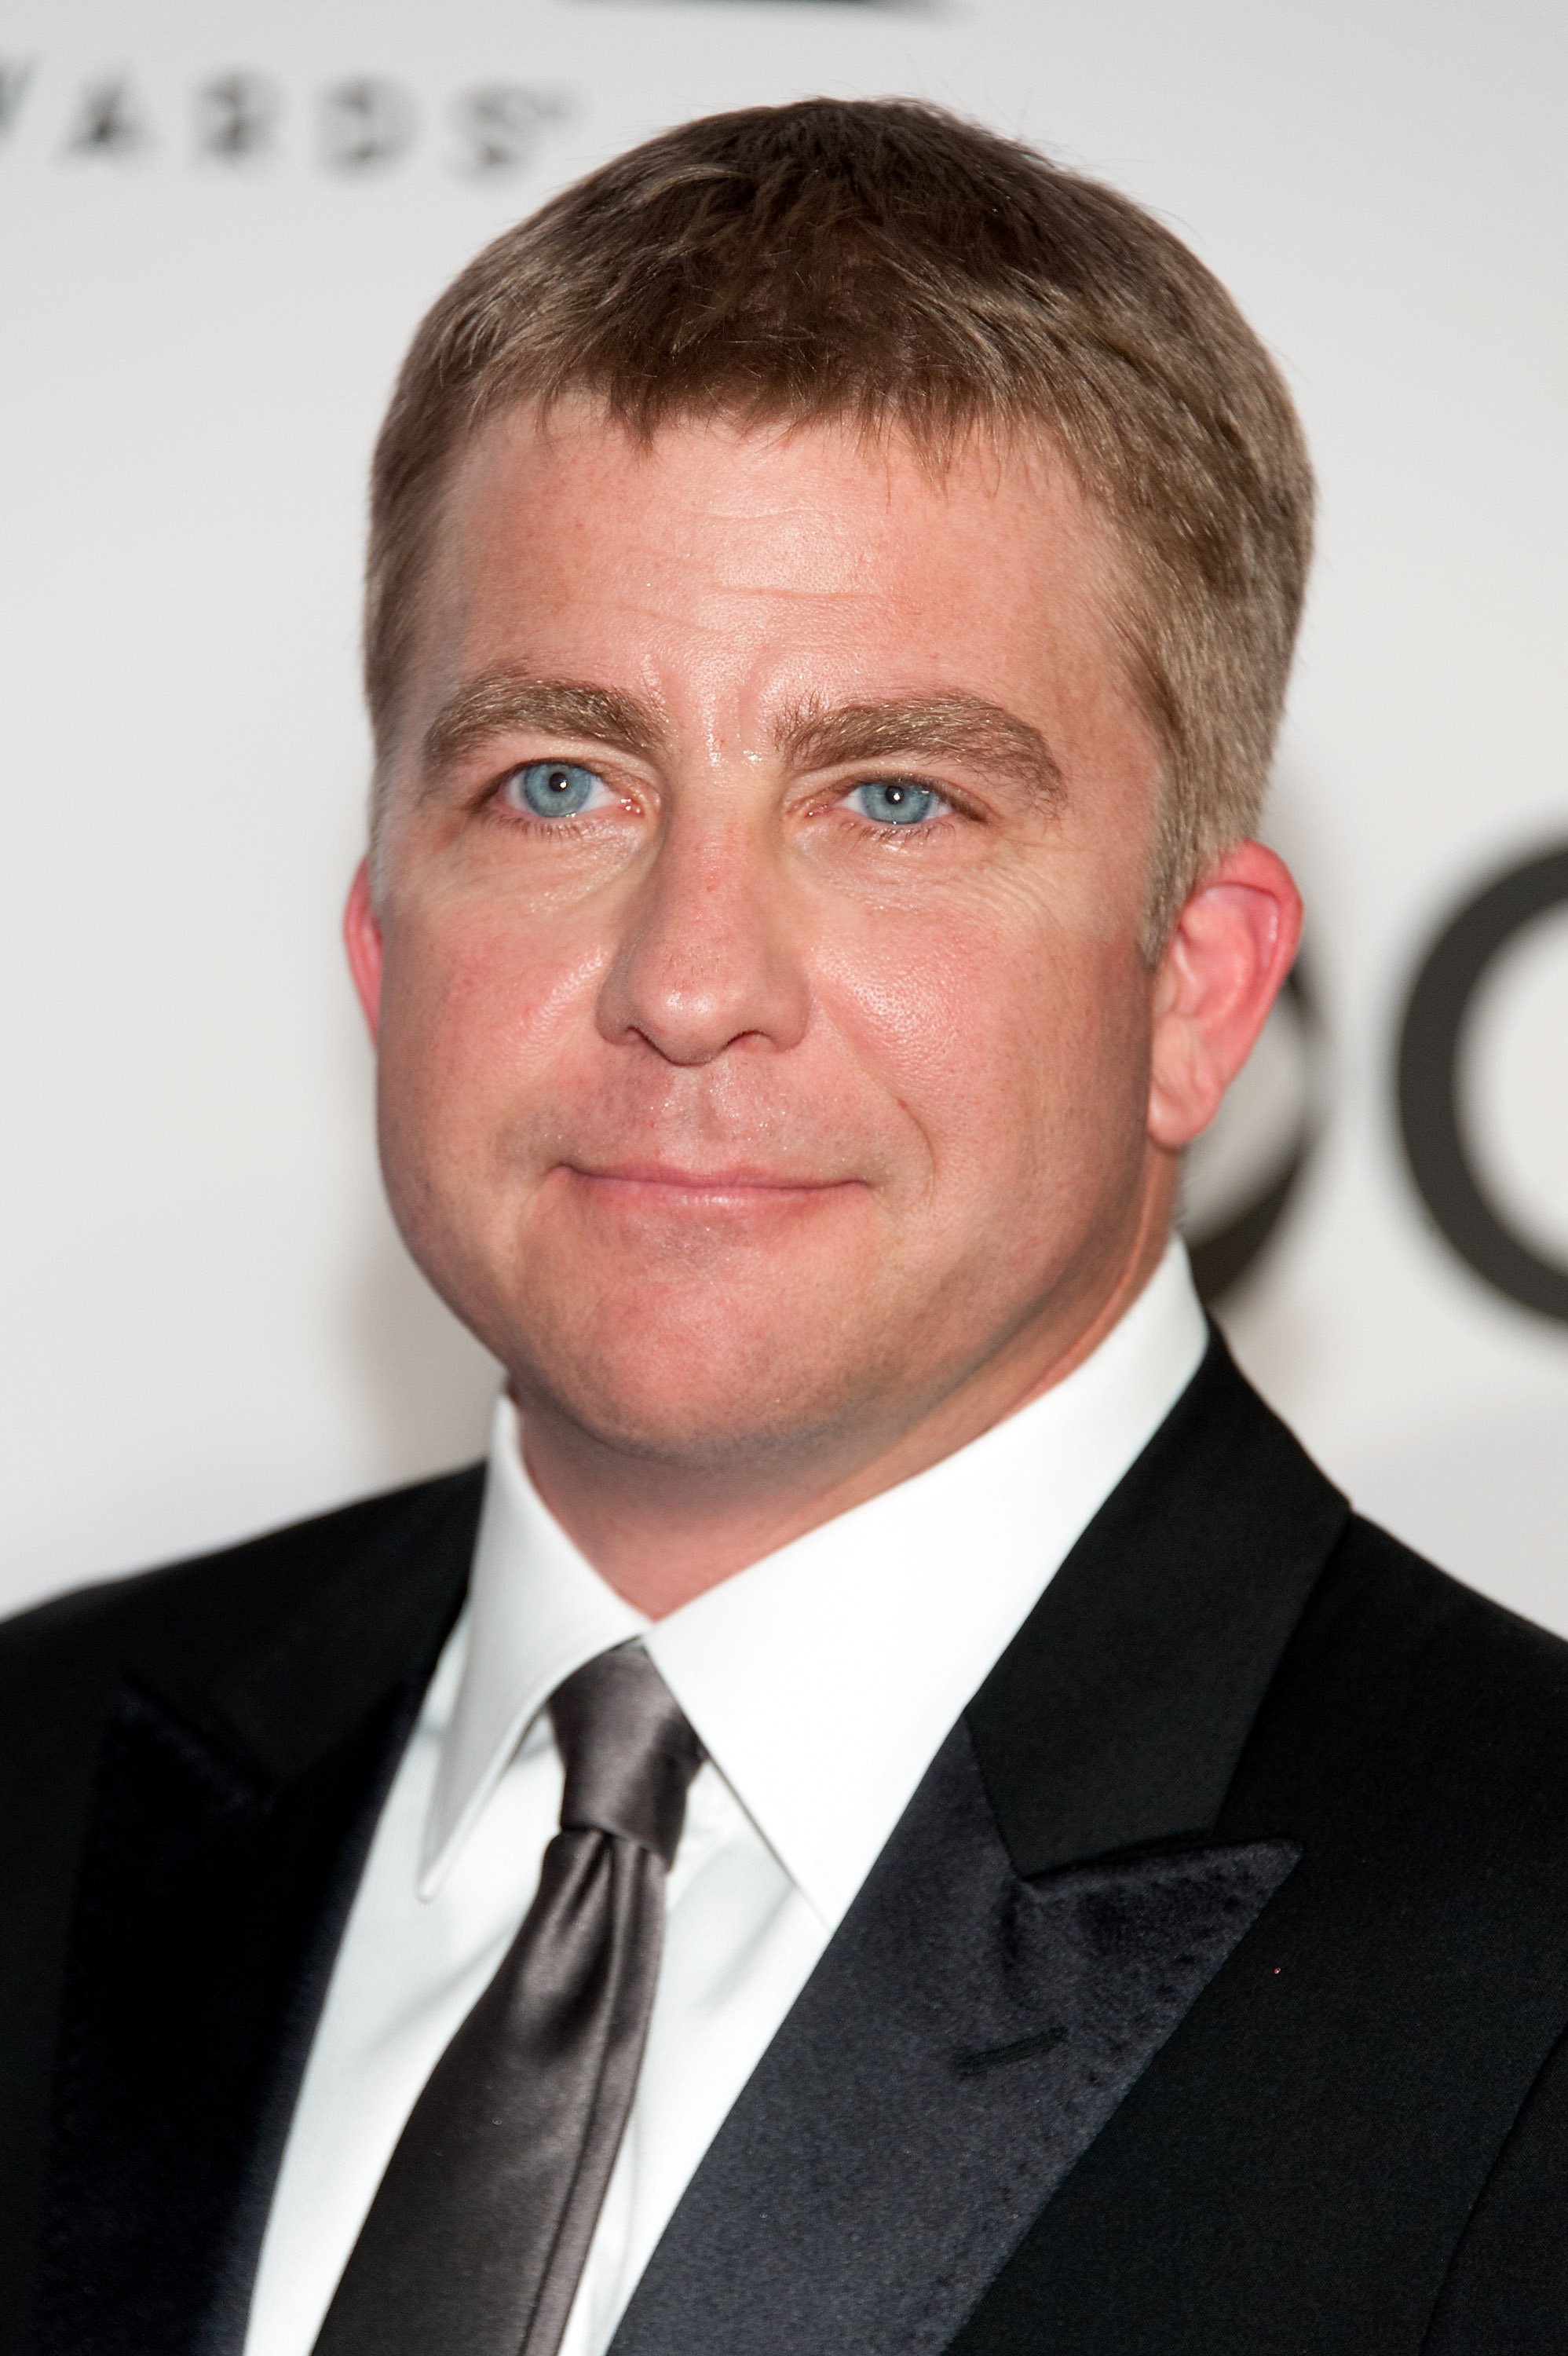 Peter Billingsley attends the 67th Annual Tony Awards at Radio City Music Hall on June 9, 2013 in New York City | Source: Getty Images 